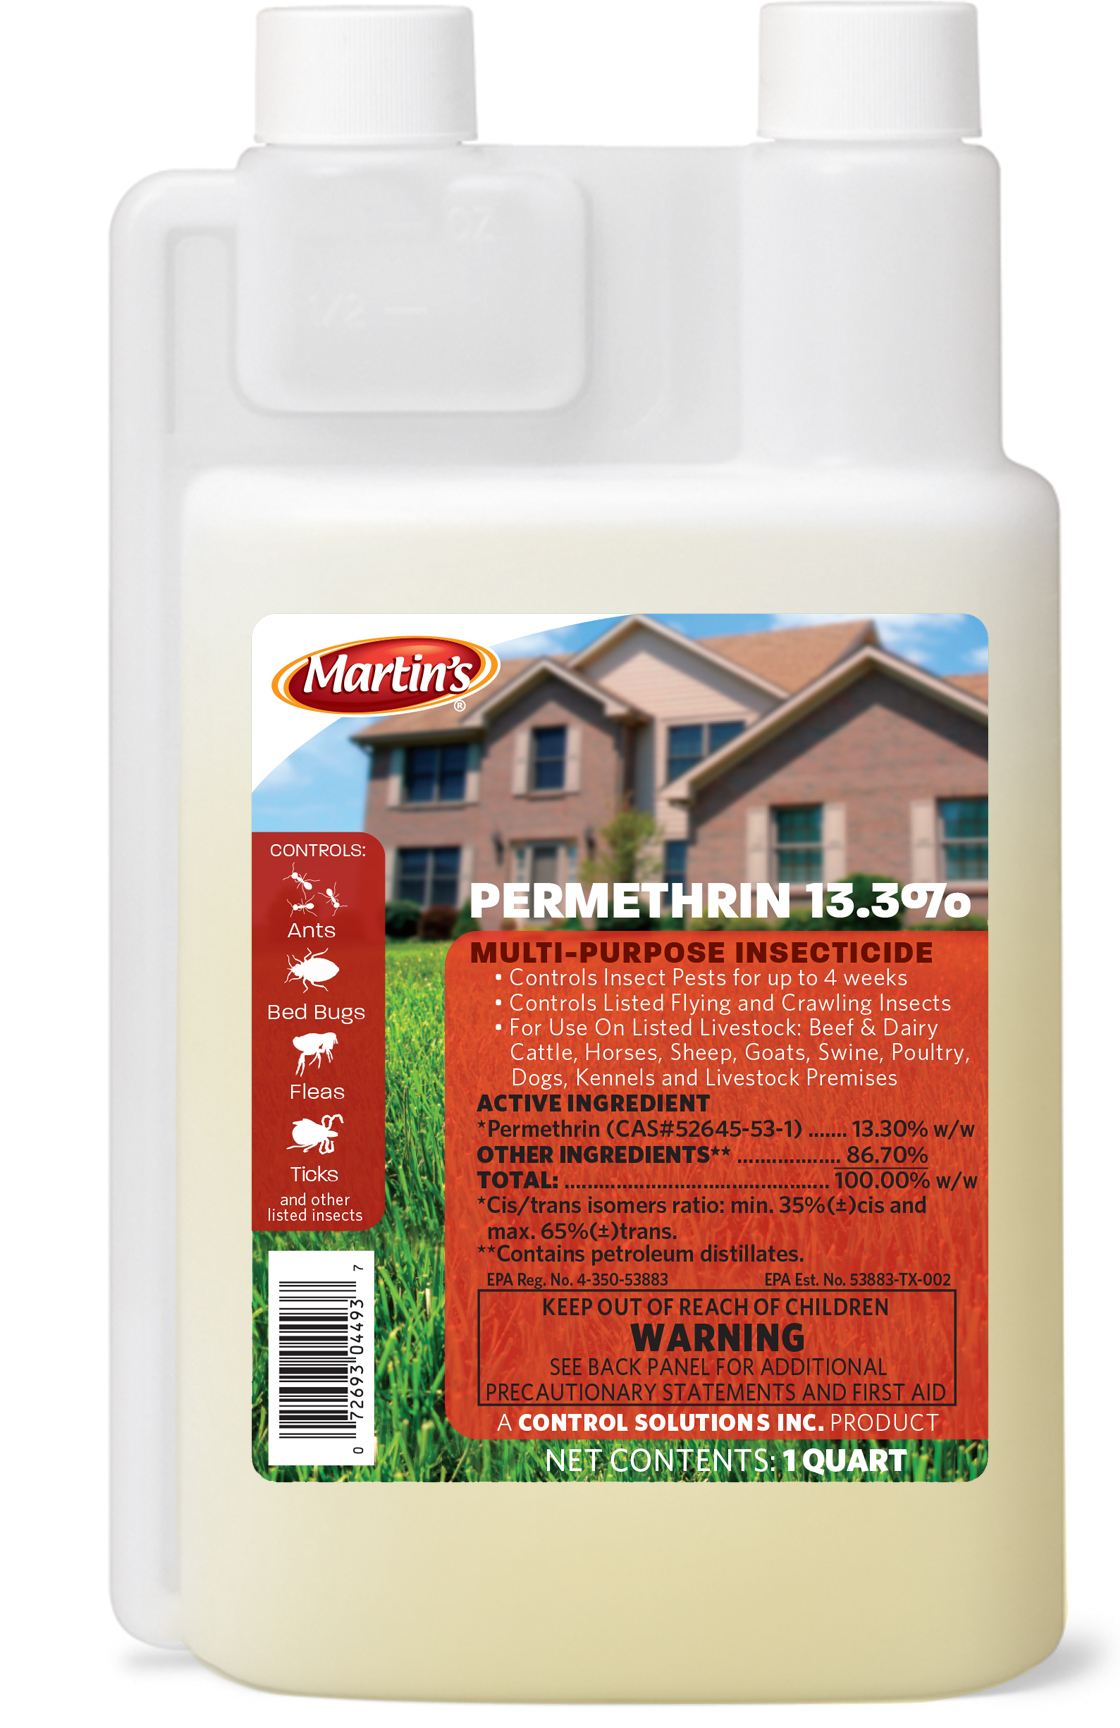 Martins Permethrin 13.3% | BackYard Chickens - Learn How to Raise Chickens